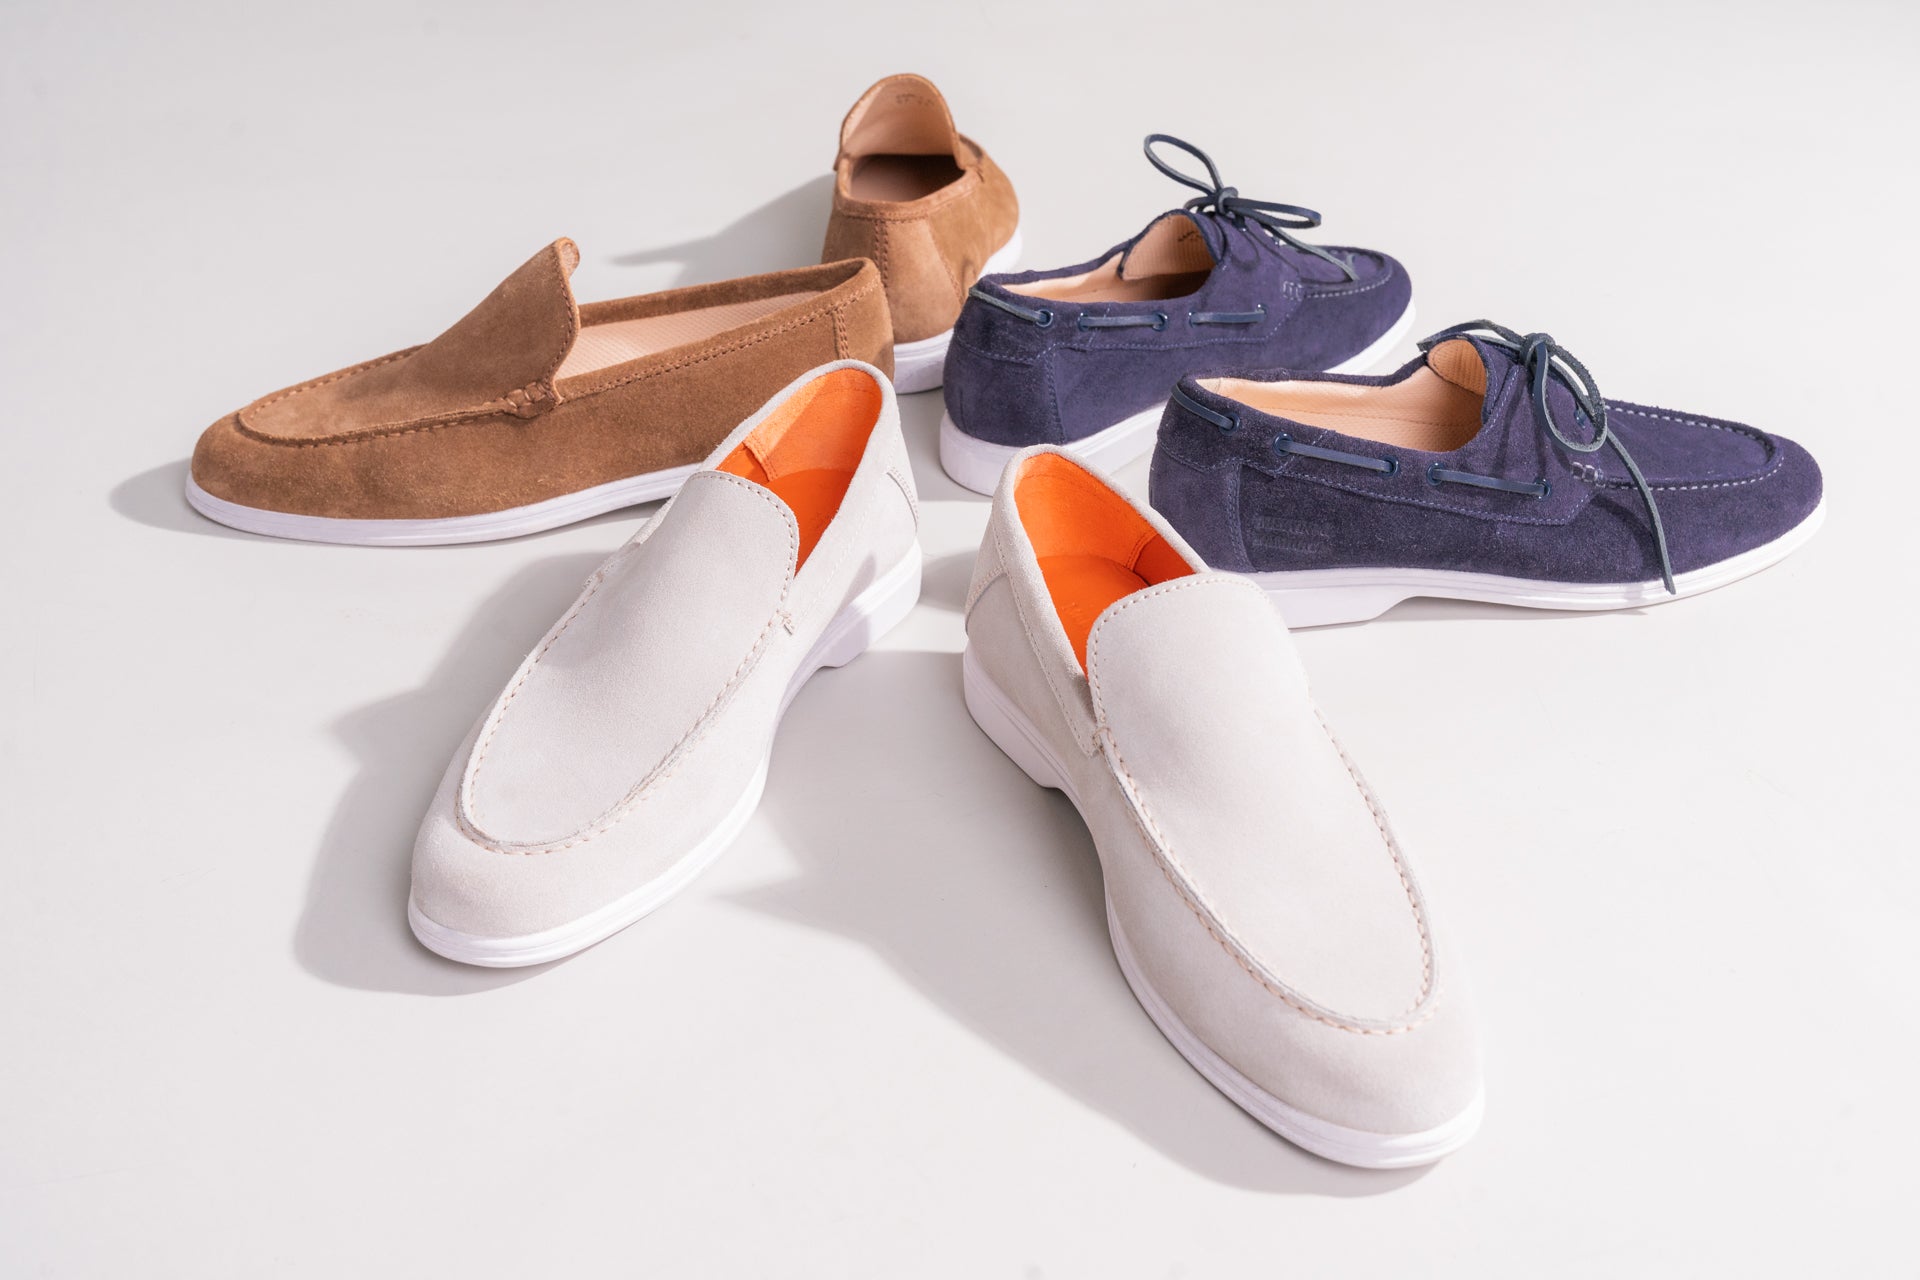 Suede shoes: how to wear this summer's trendy material? – Melvin & Hamilton